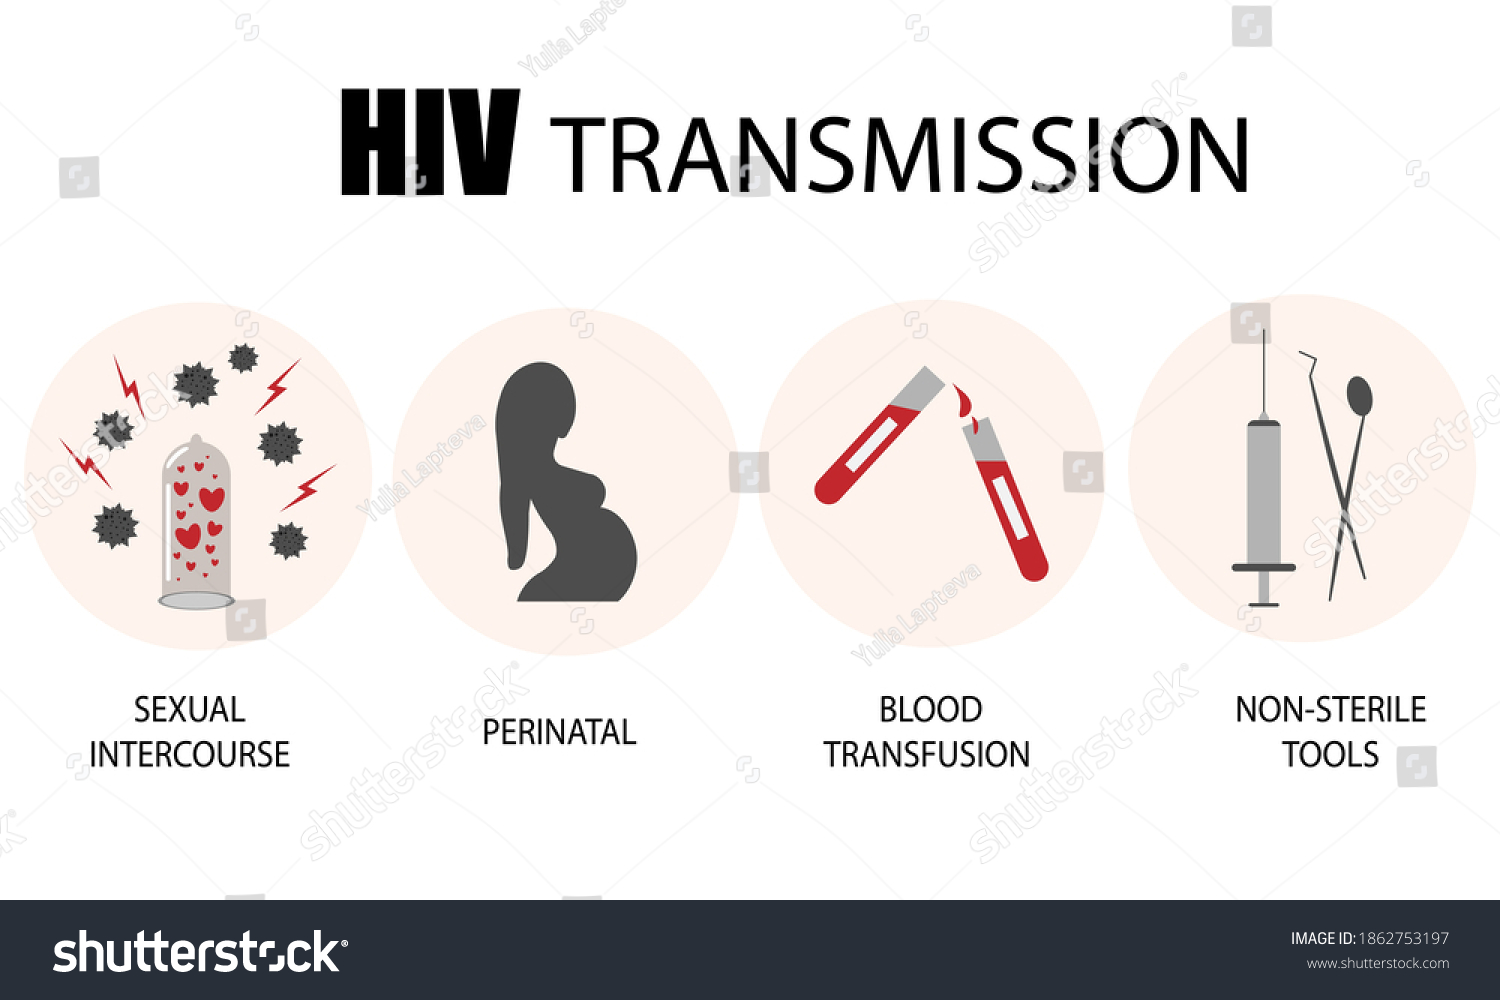 How Can You Get HIV? Understanding the 4 Main Transmission Routes